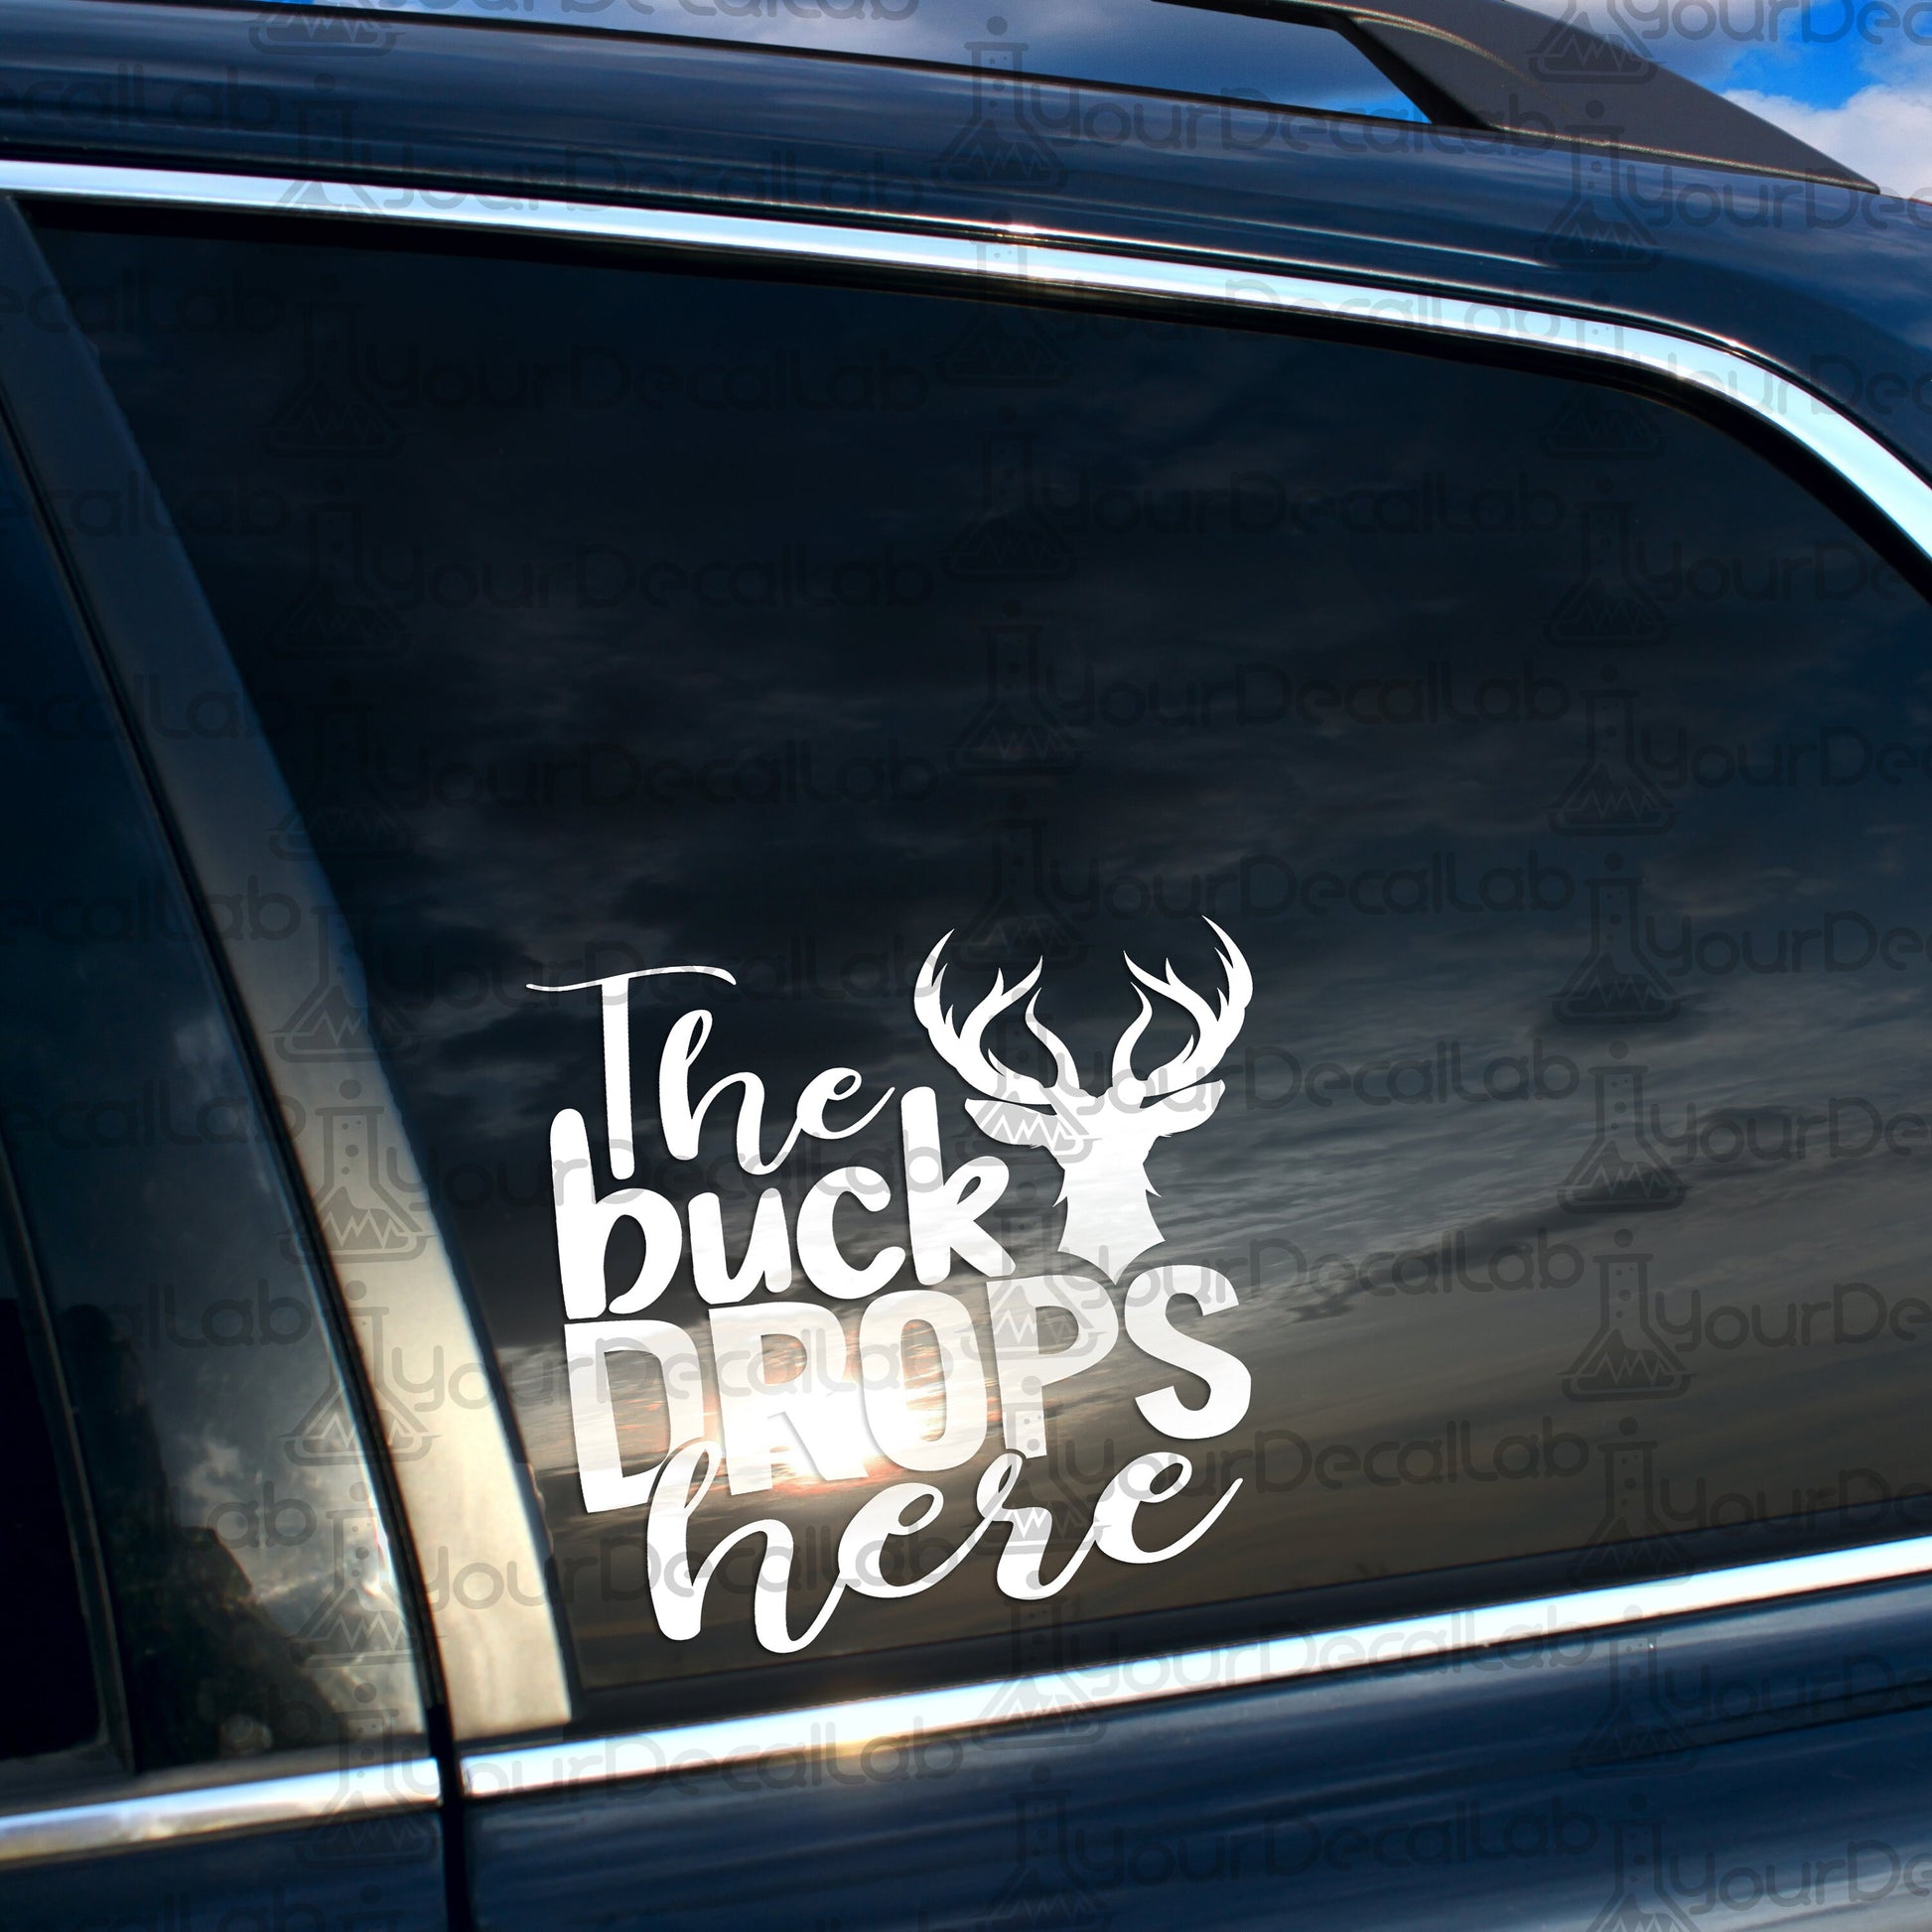 the buck drops here sticker on the back of a car